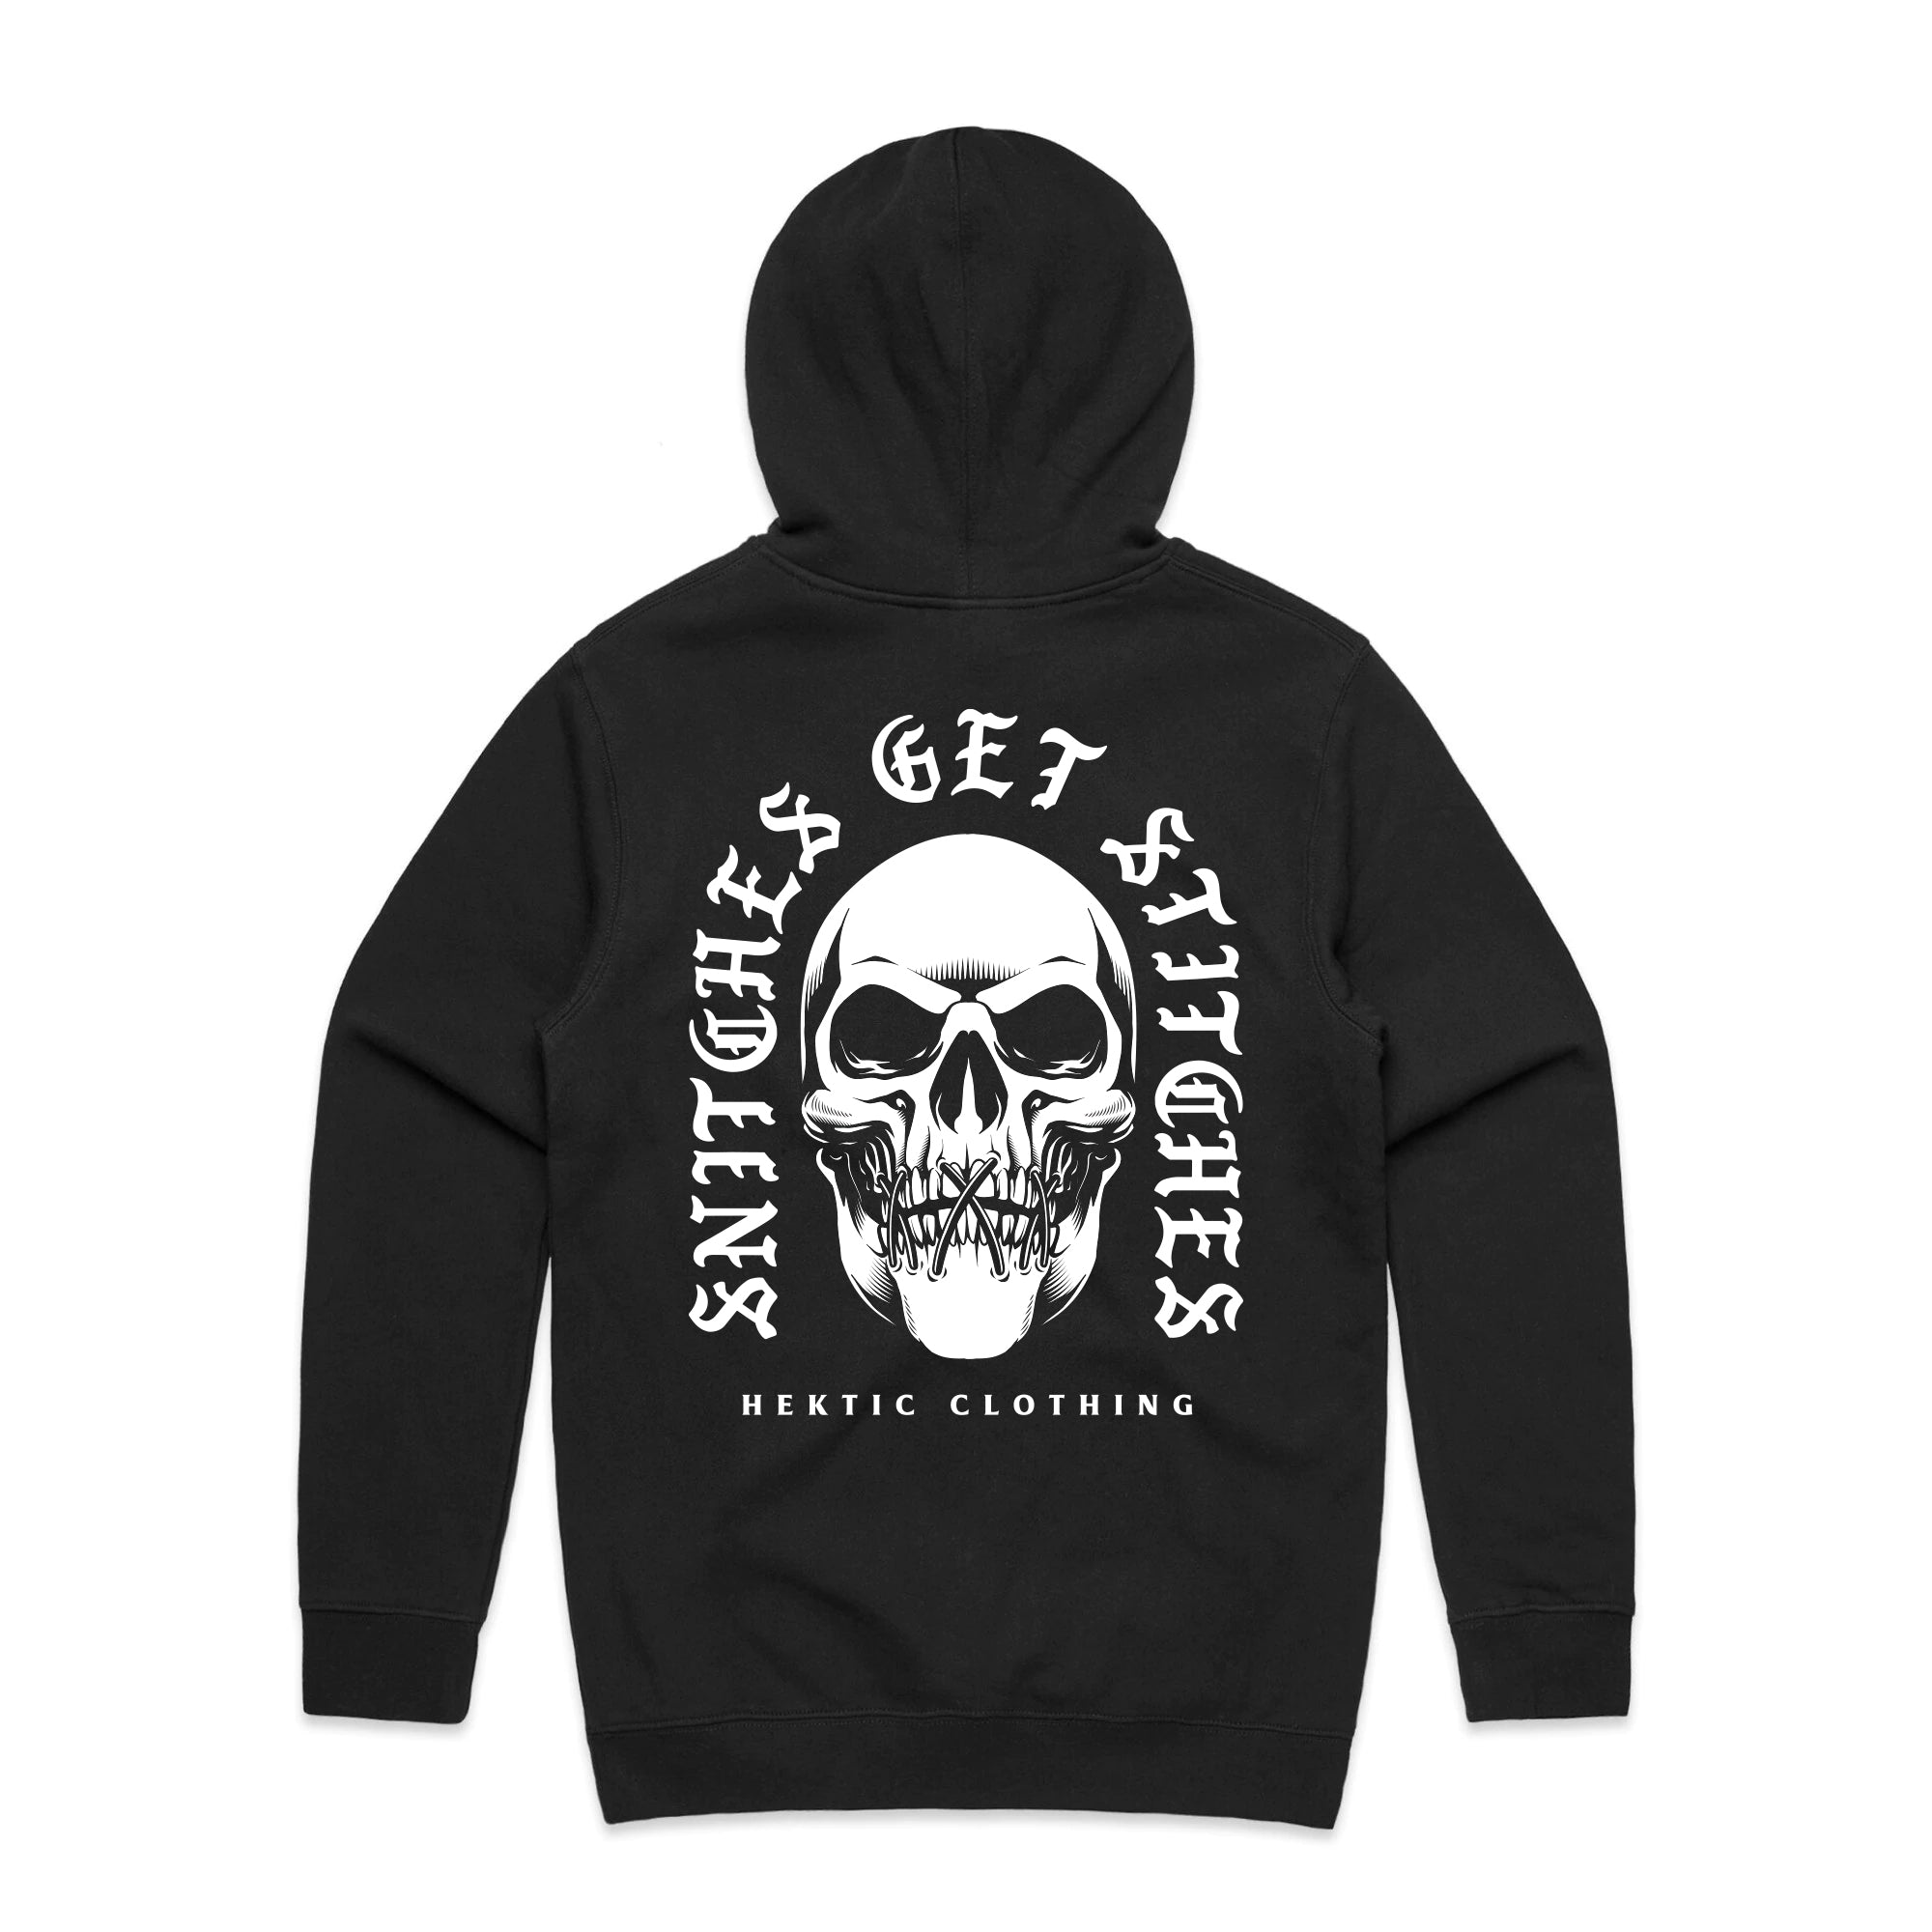 SNITCHES GET STITCHES HOOD – Hektic Clothing